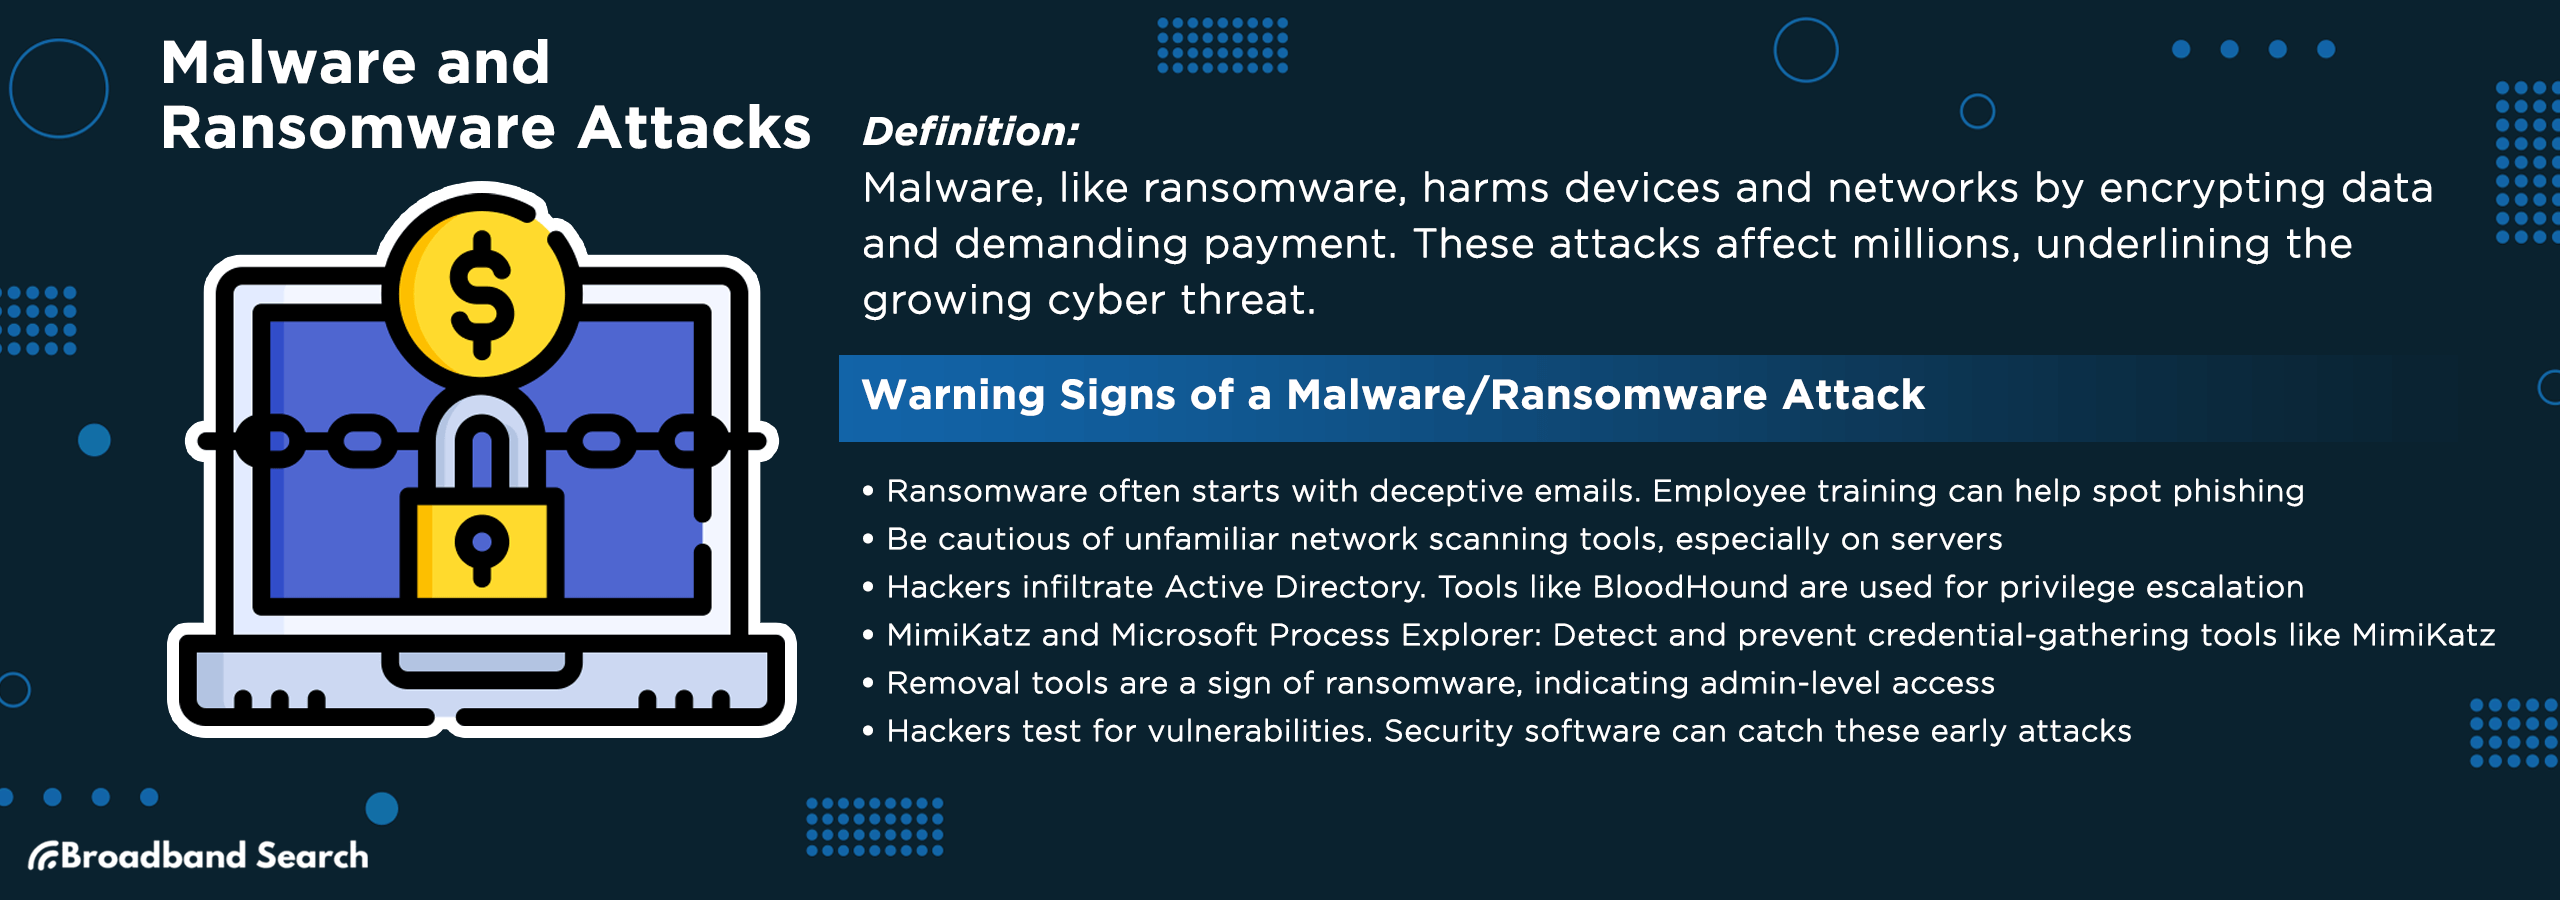 Definition and signs of Malware and randsomware attacks